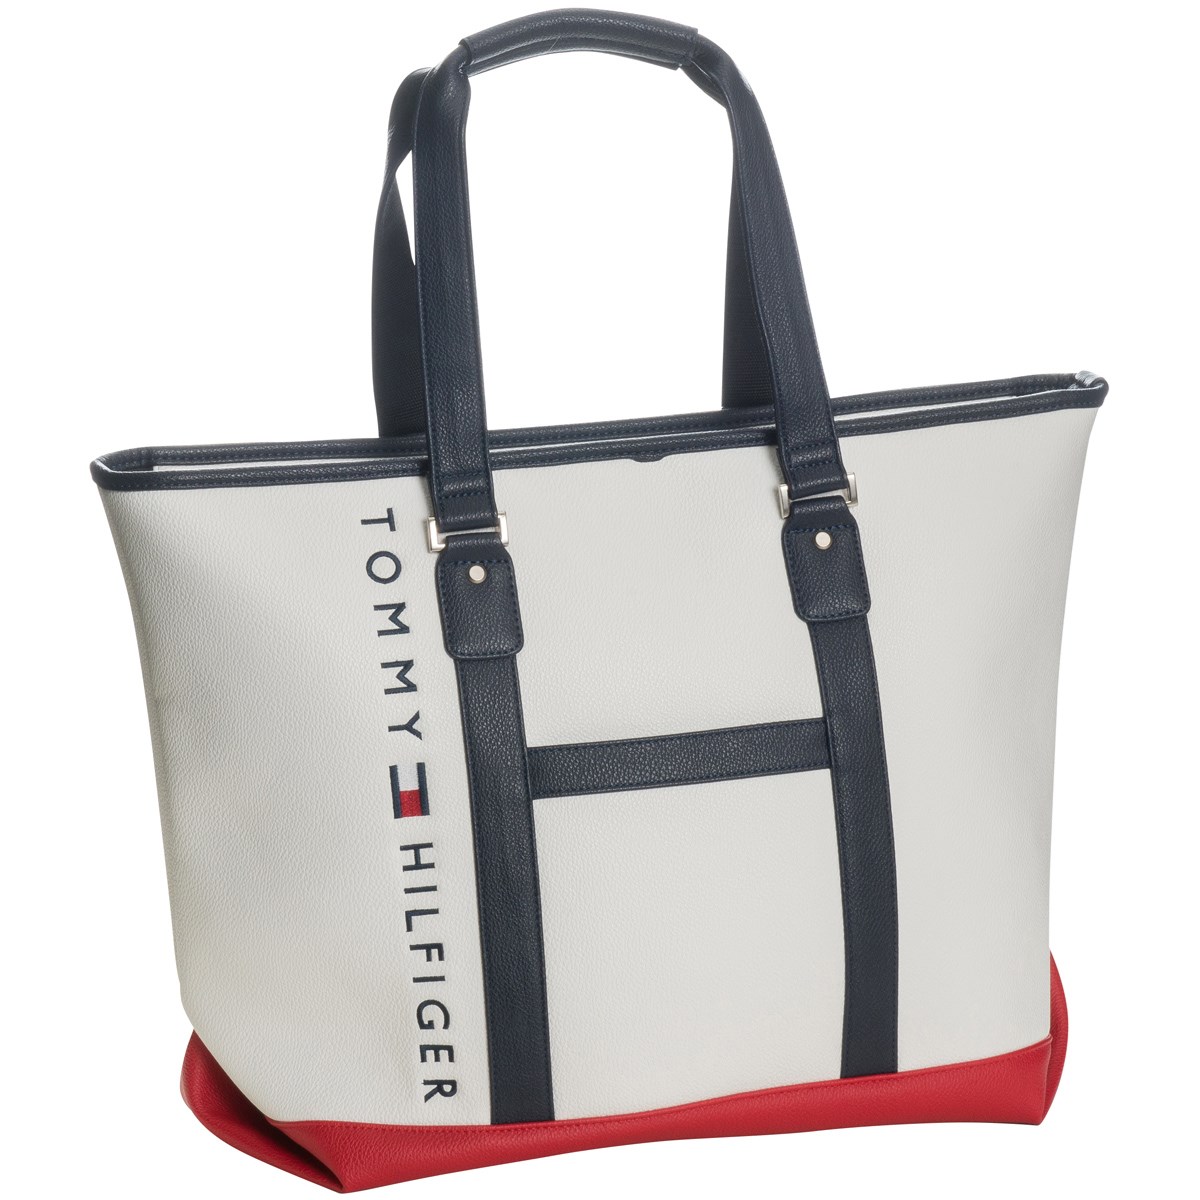 THE FACE トートバッグ(トートバッグ)|TOMMY HILFIGER GOLF(トミー 